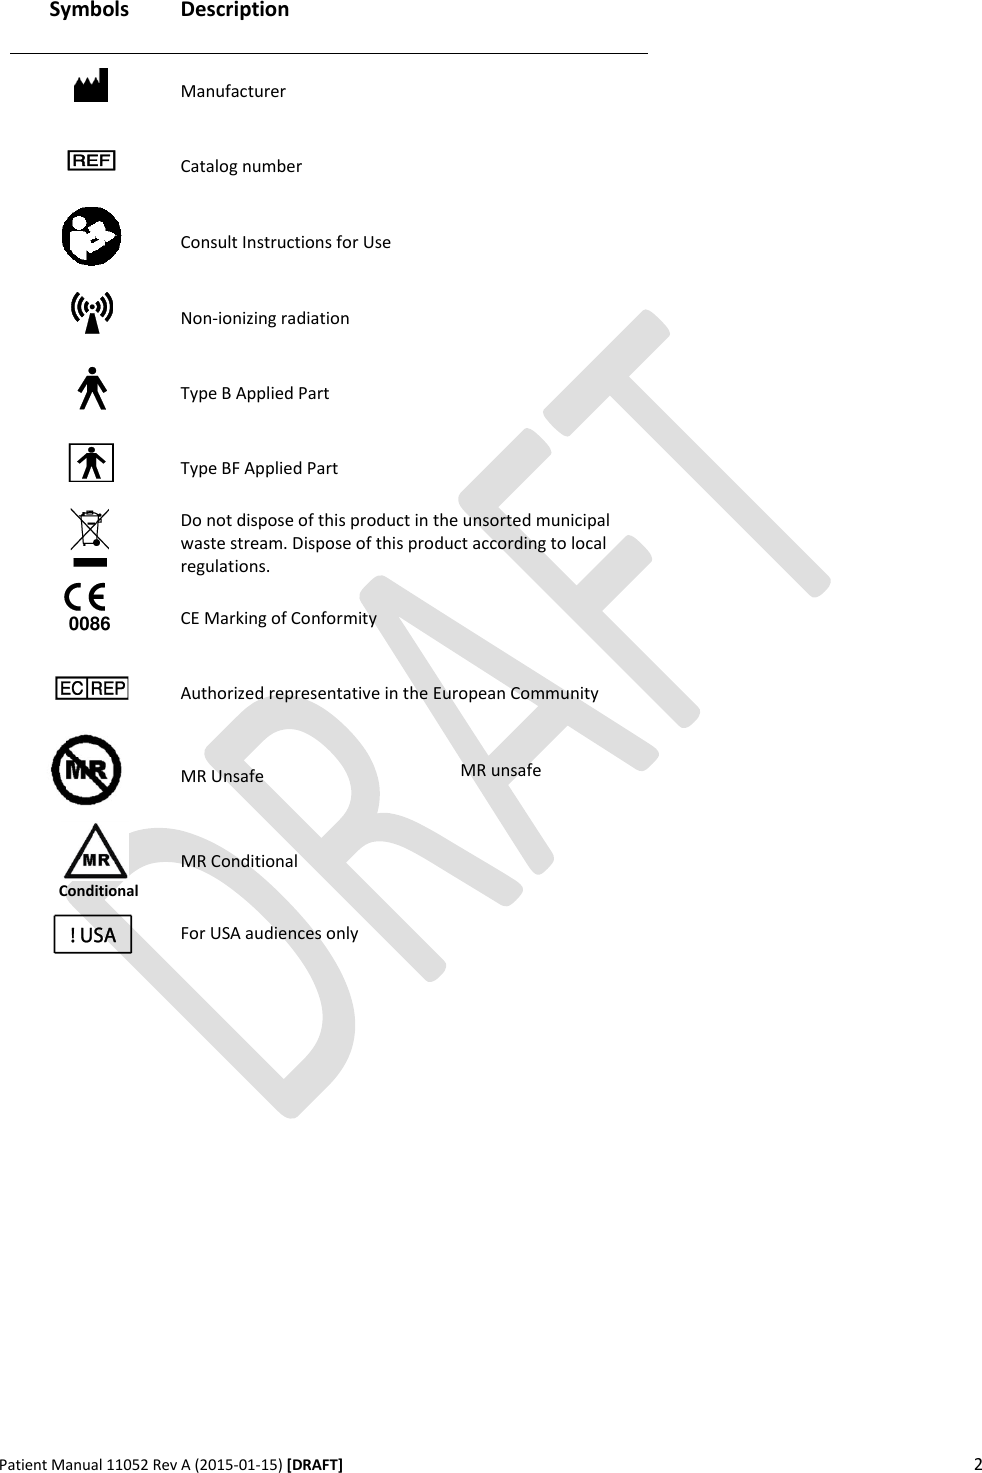      Patient Manual 11052 Rev A (2015-01-15) [DRAFT] 2   Symbols Description  Manufacturer  Catalog number  Consult Instructions for Use  Non-ionizing radiation  Type B Applied Part  Type BF Applied Part  Do not dispose of this product in the unsorted municipal waste stream. Dispose of this product according to local regulations.  CE Marking of Conformity  Authorized representative in the European Community  MR unsafe  MR Unsafe          Conditional   MR Conditional    For USA audiences only  0086 